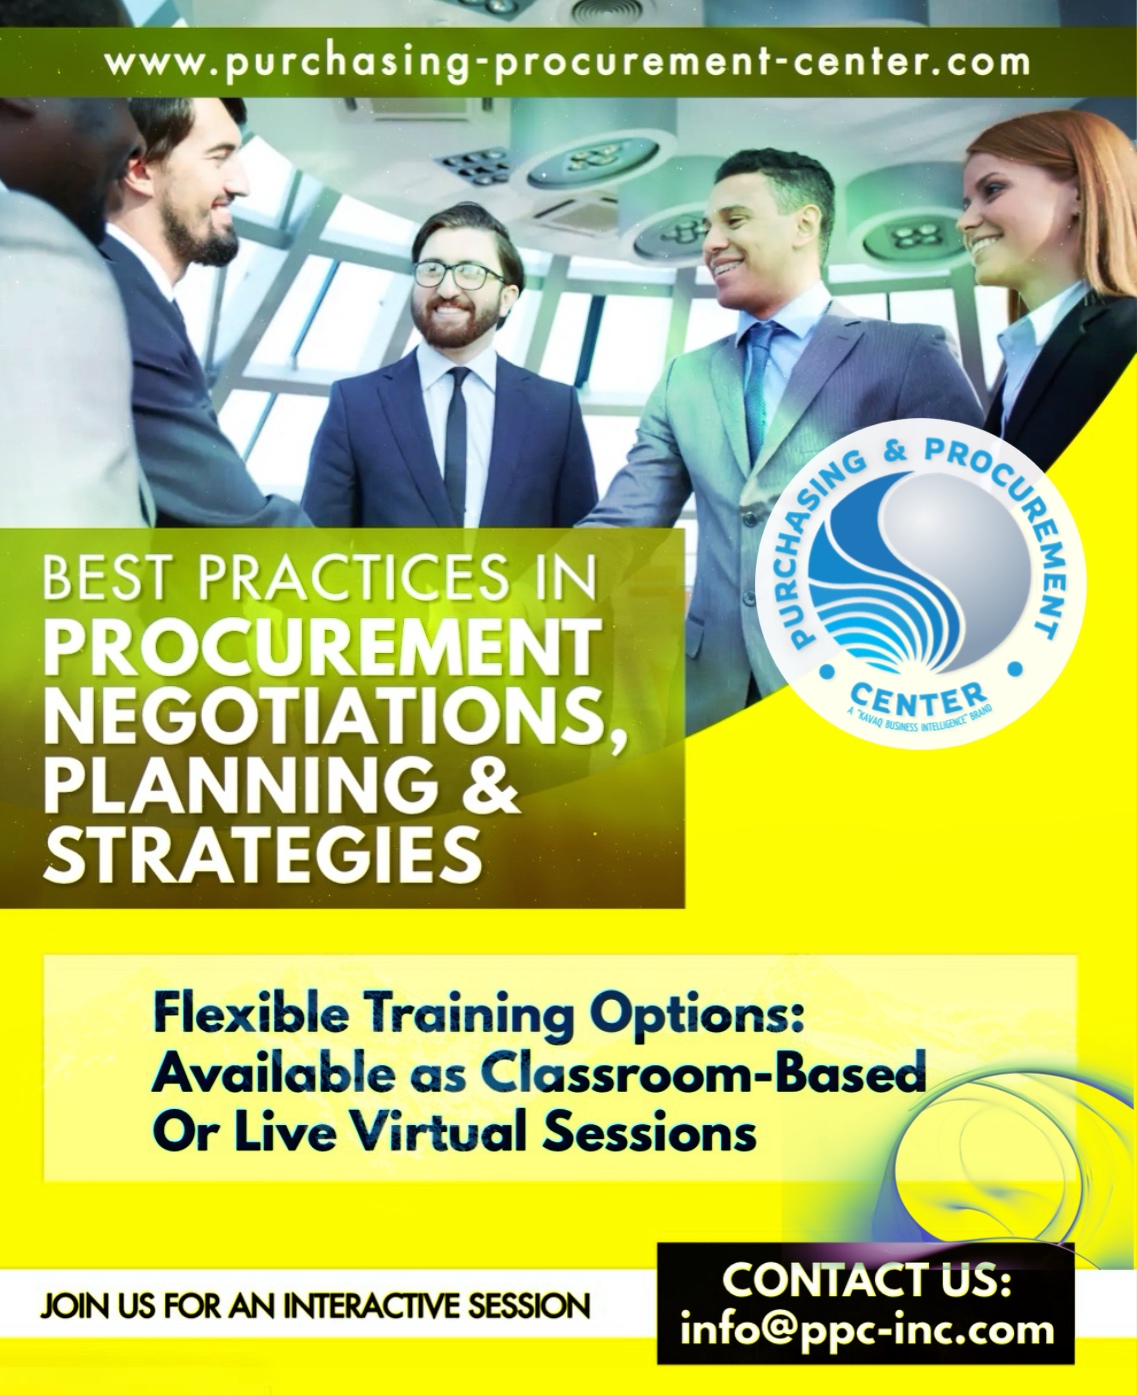 Procurement Negotiation course is Designed to Provide Strong Competencies in the Methods and Strategies that will Result in Successful Negotiations w/ Suppliers